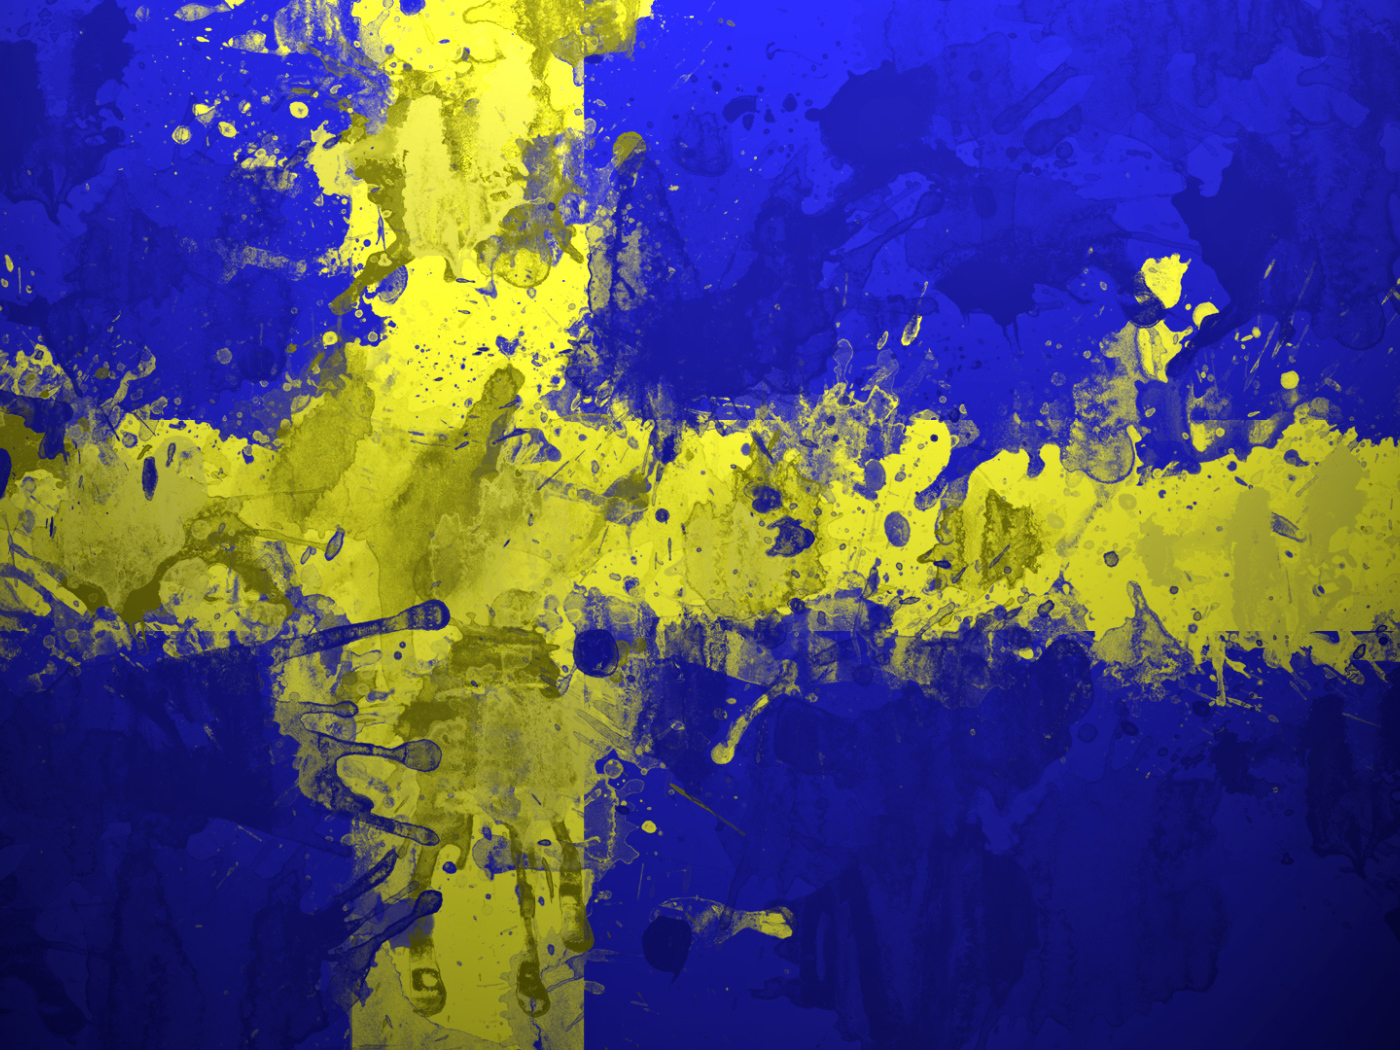 Painted flag of Sweden